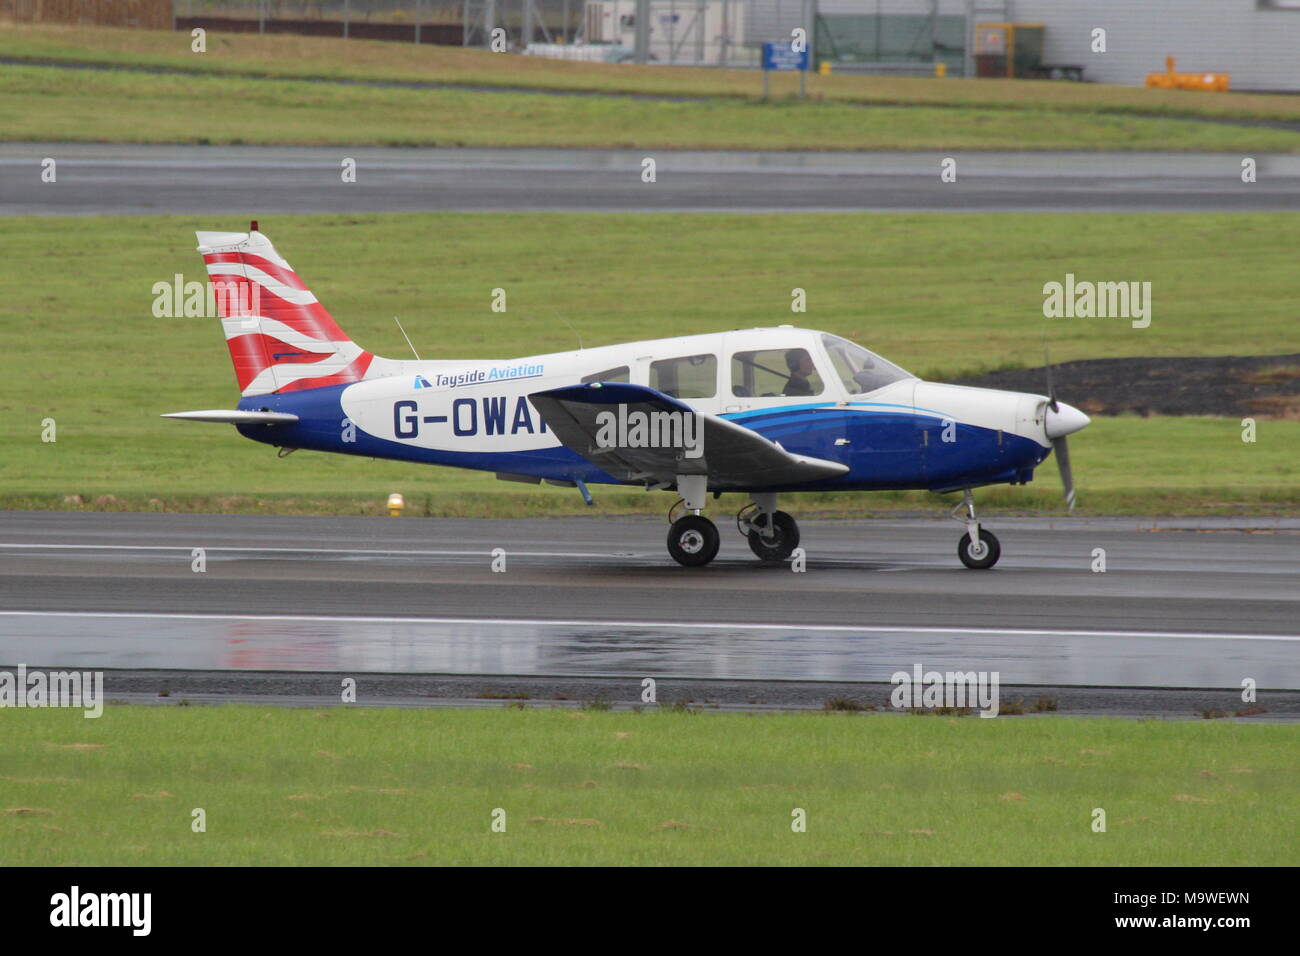 G-OWAP, a Piper PA-28-161 Warrior II operated by Tayside Aviation, at Prestwick Airport in Ayrshire. Stock Photo